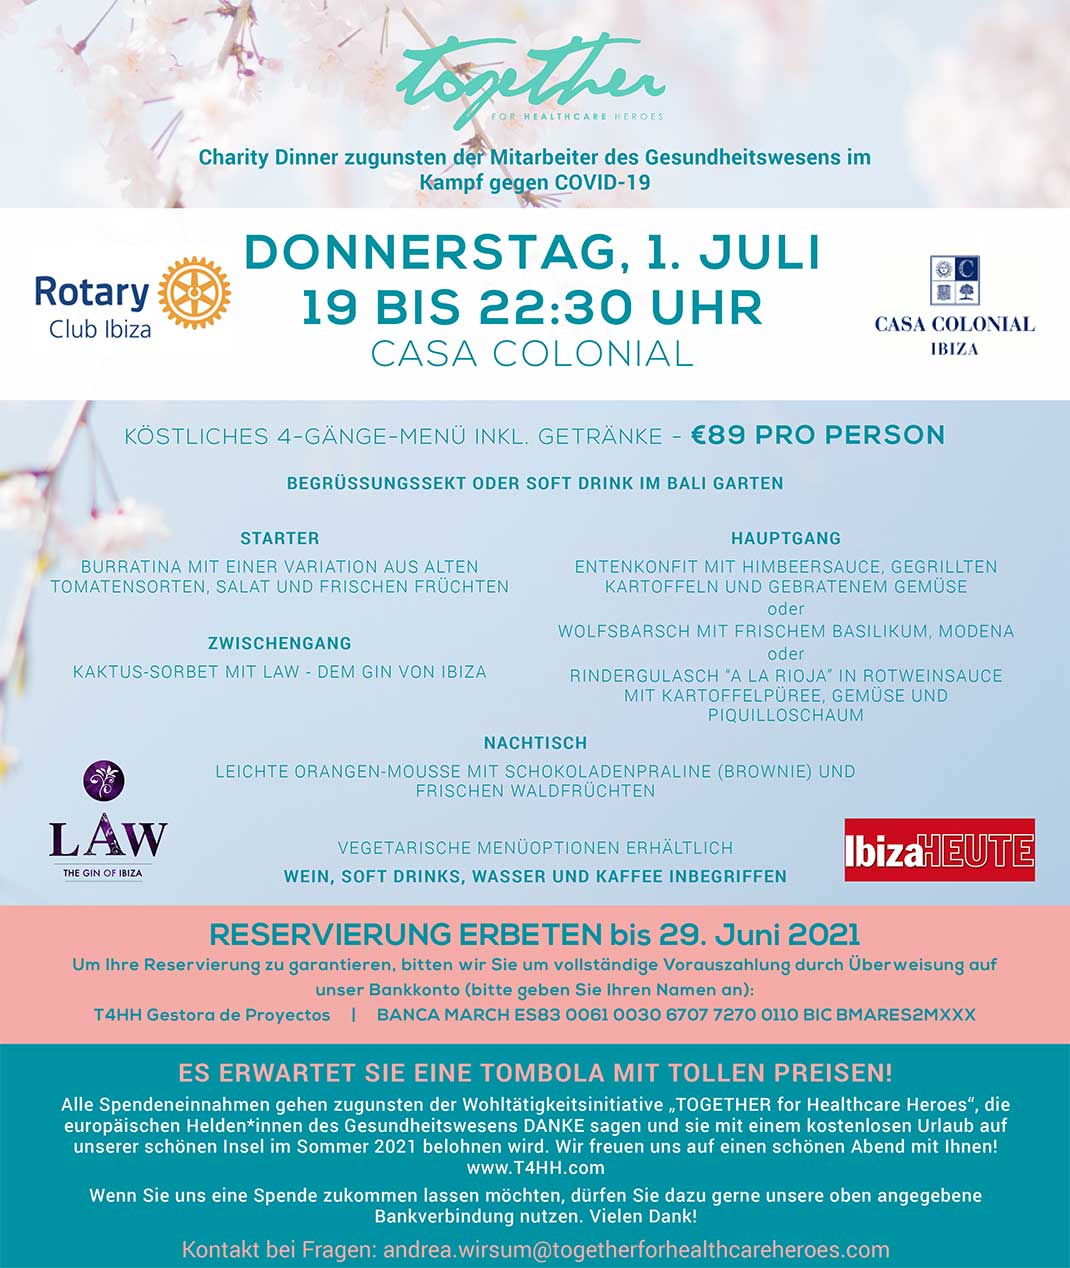 Am Donnerstag Charity-Dinner und Tombola im Casa Colonial